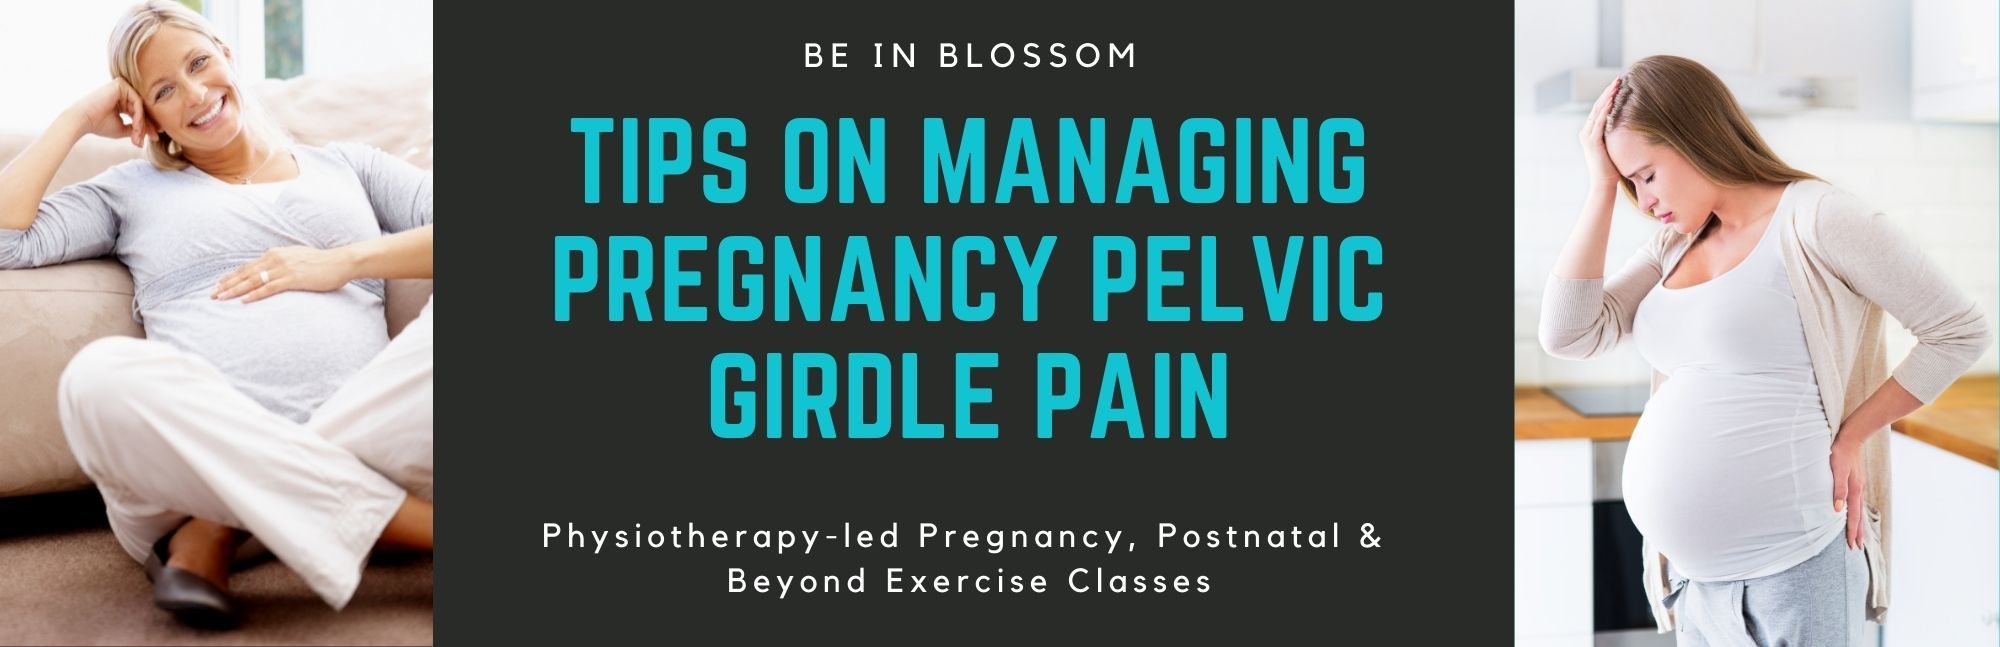 Tips to Manage Pelvic Pain in Pregnancy